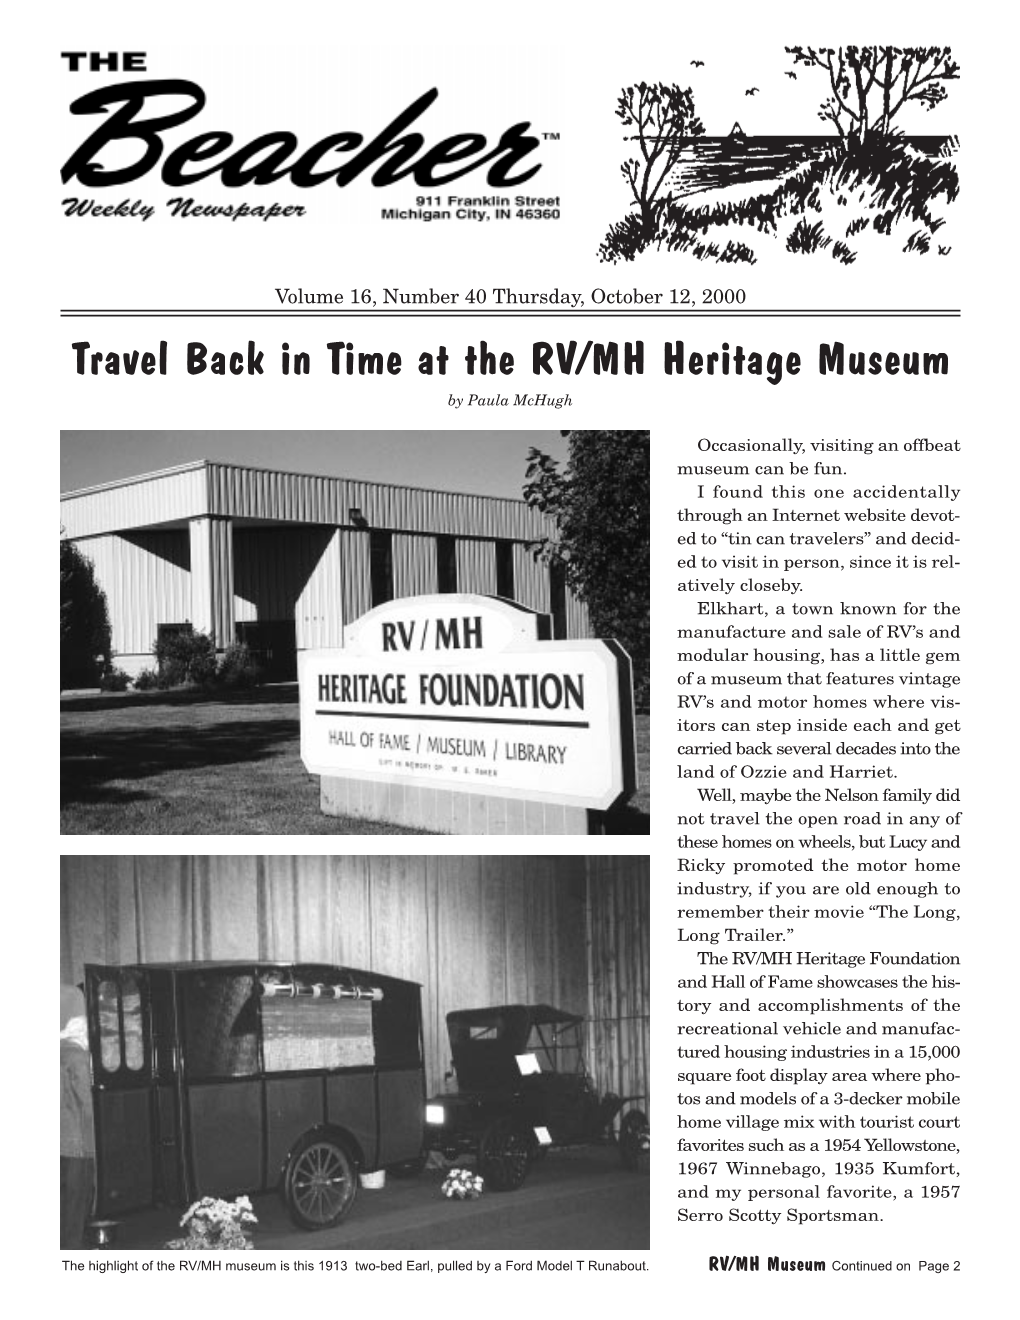 Travel Back in Time at the RV/MH Heritage Museum by Paula Mchugh